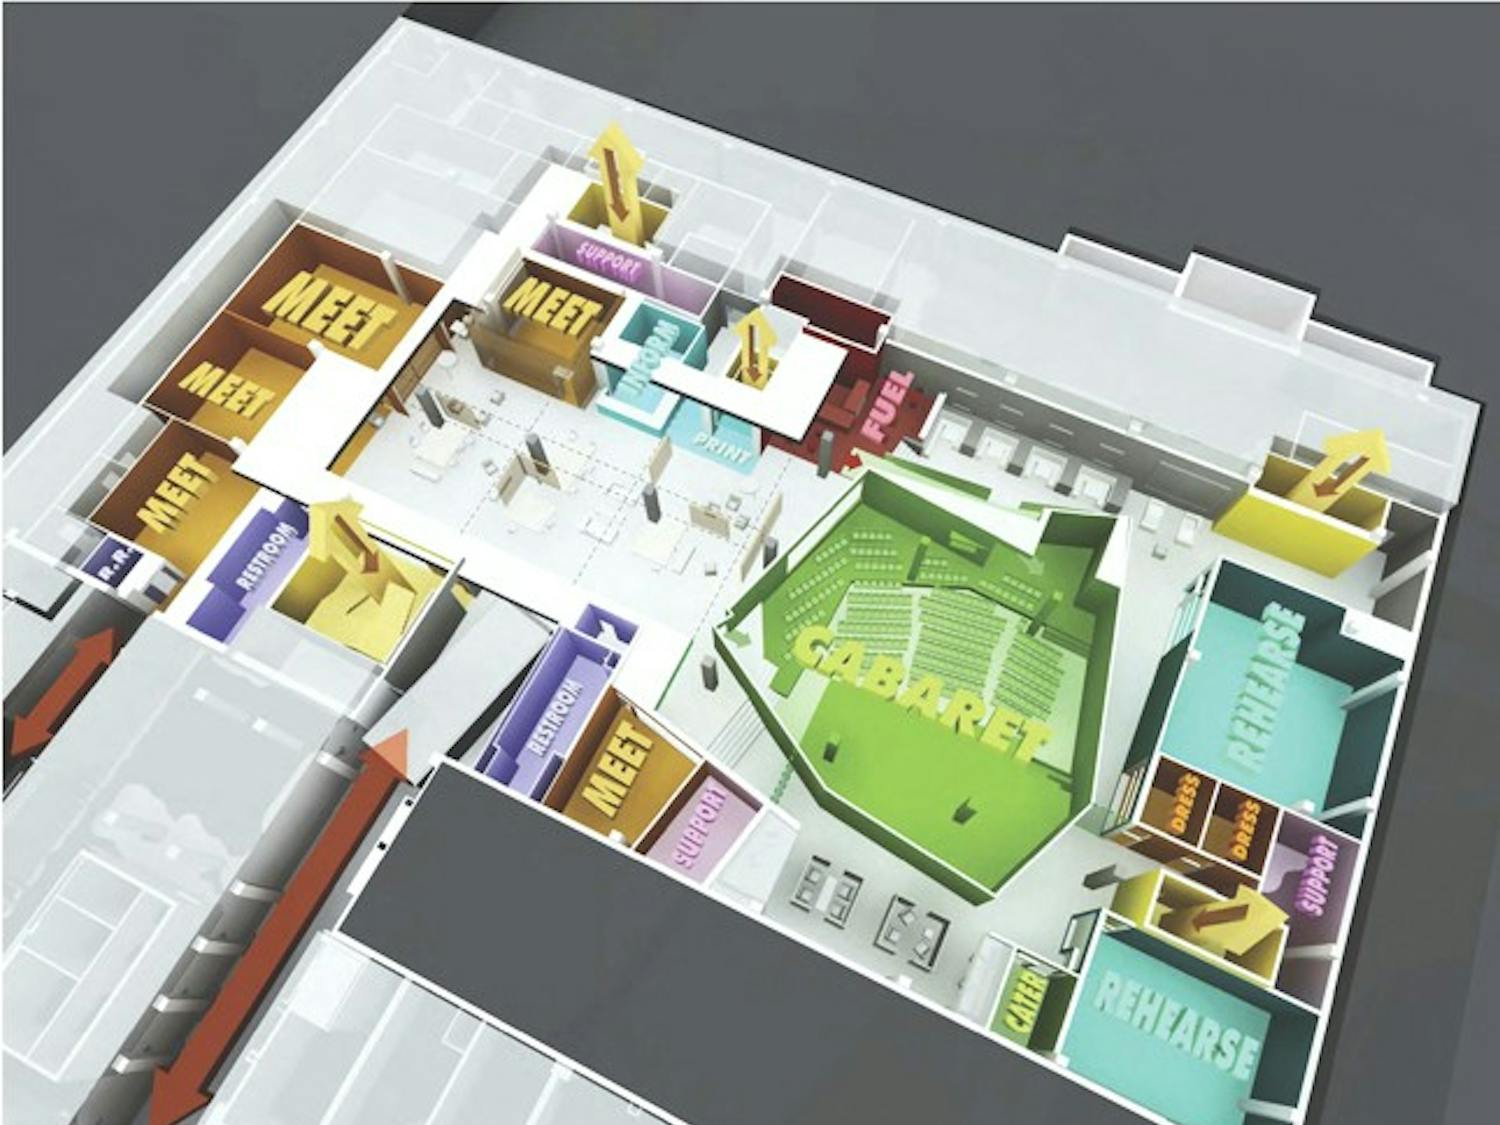 	UCOMMONS, a proposed rennovation project for the Student Union includes an all-night ground floor as well as several other updates. Courtesy of Ucommons.